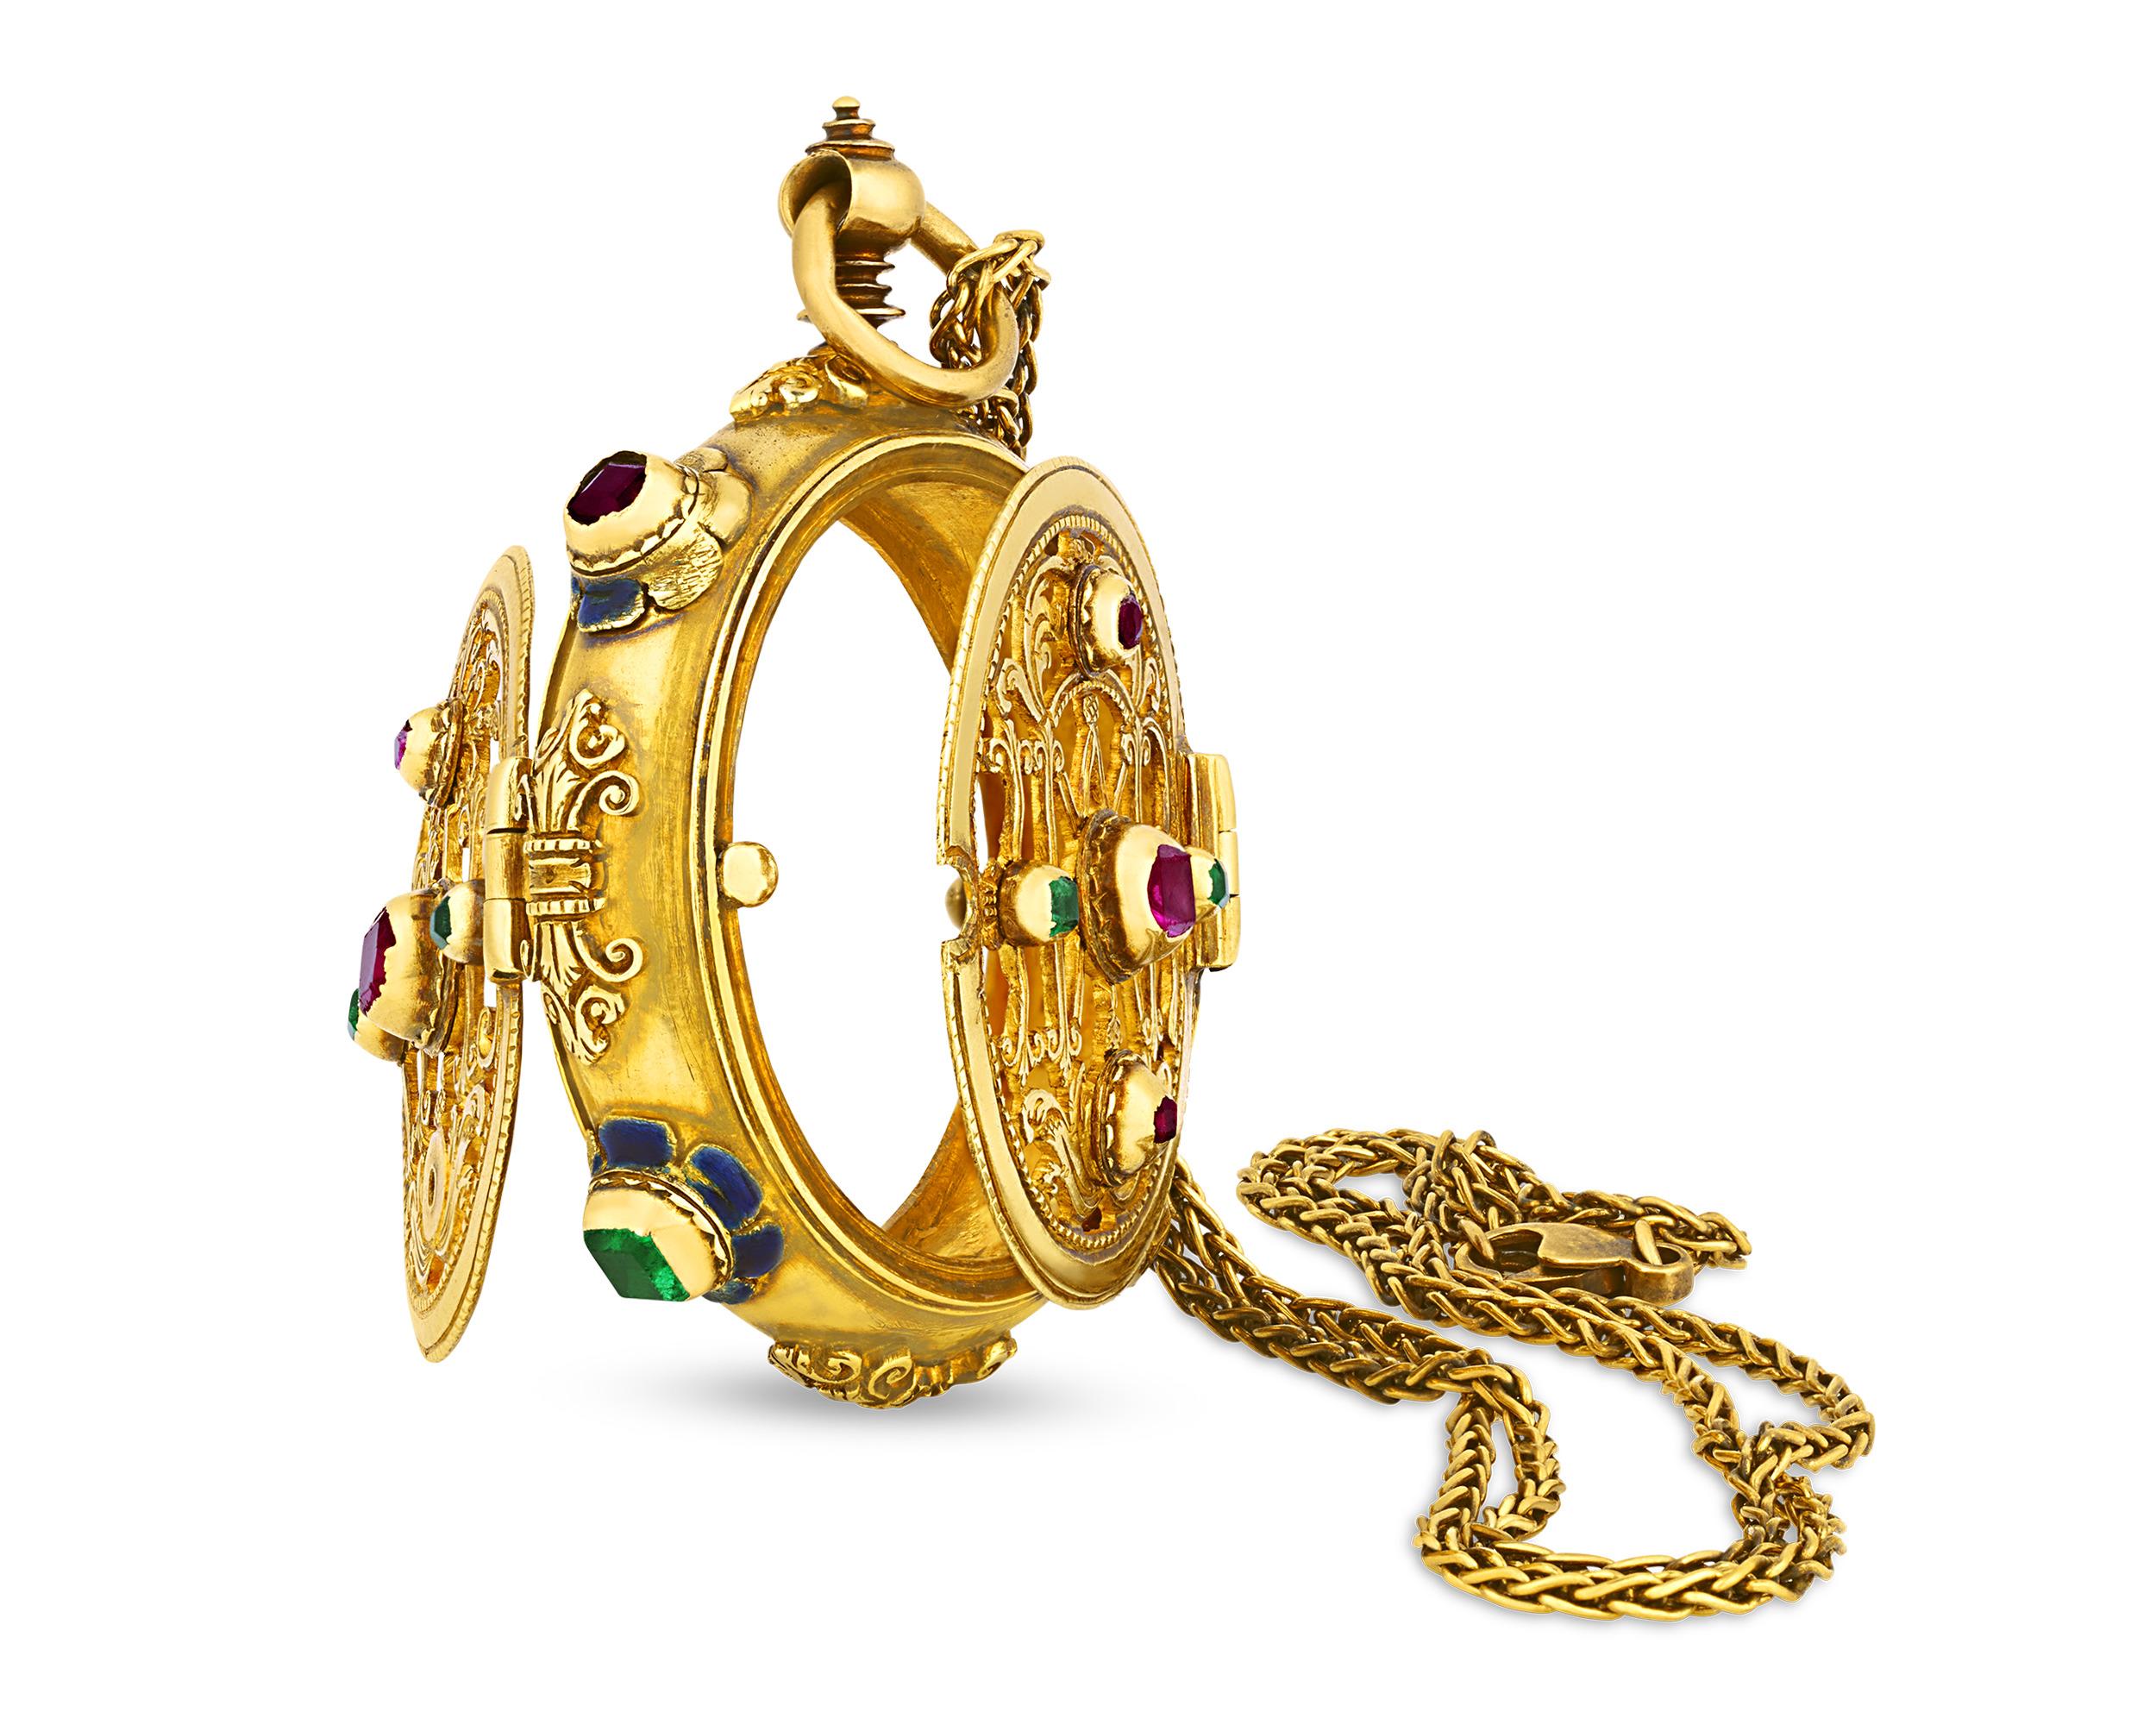 This romantic 18th-century French pendant features verdant emerald and crimson ruby accents set in lustrous 18K yellow gold. More than an elegant statement necklace, the pendant would have served a dual function as a vinaigrette. Gentlemen and